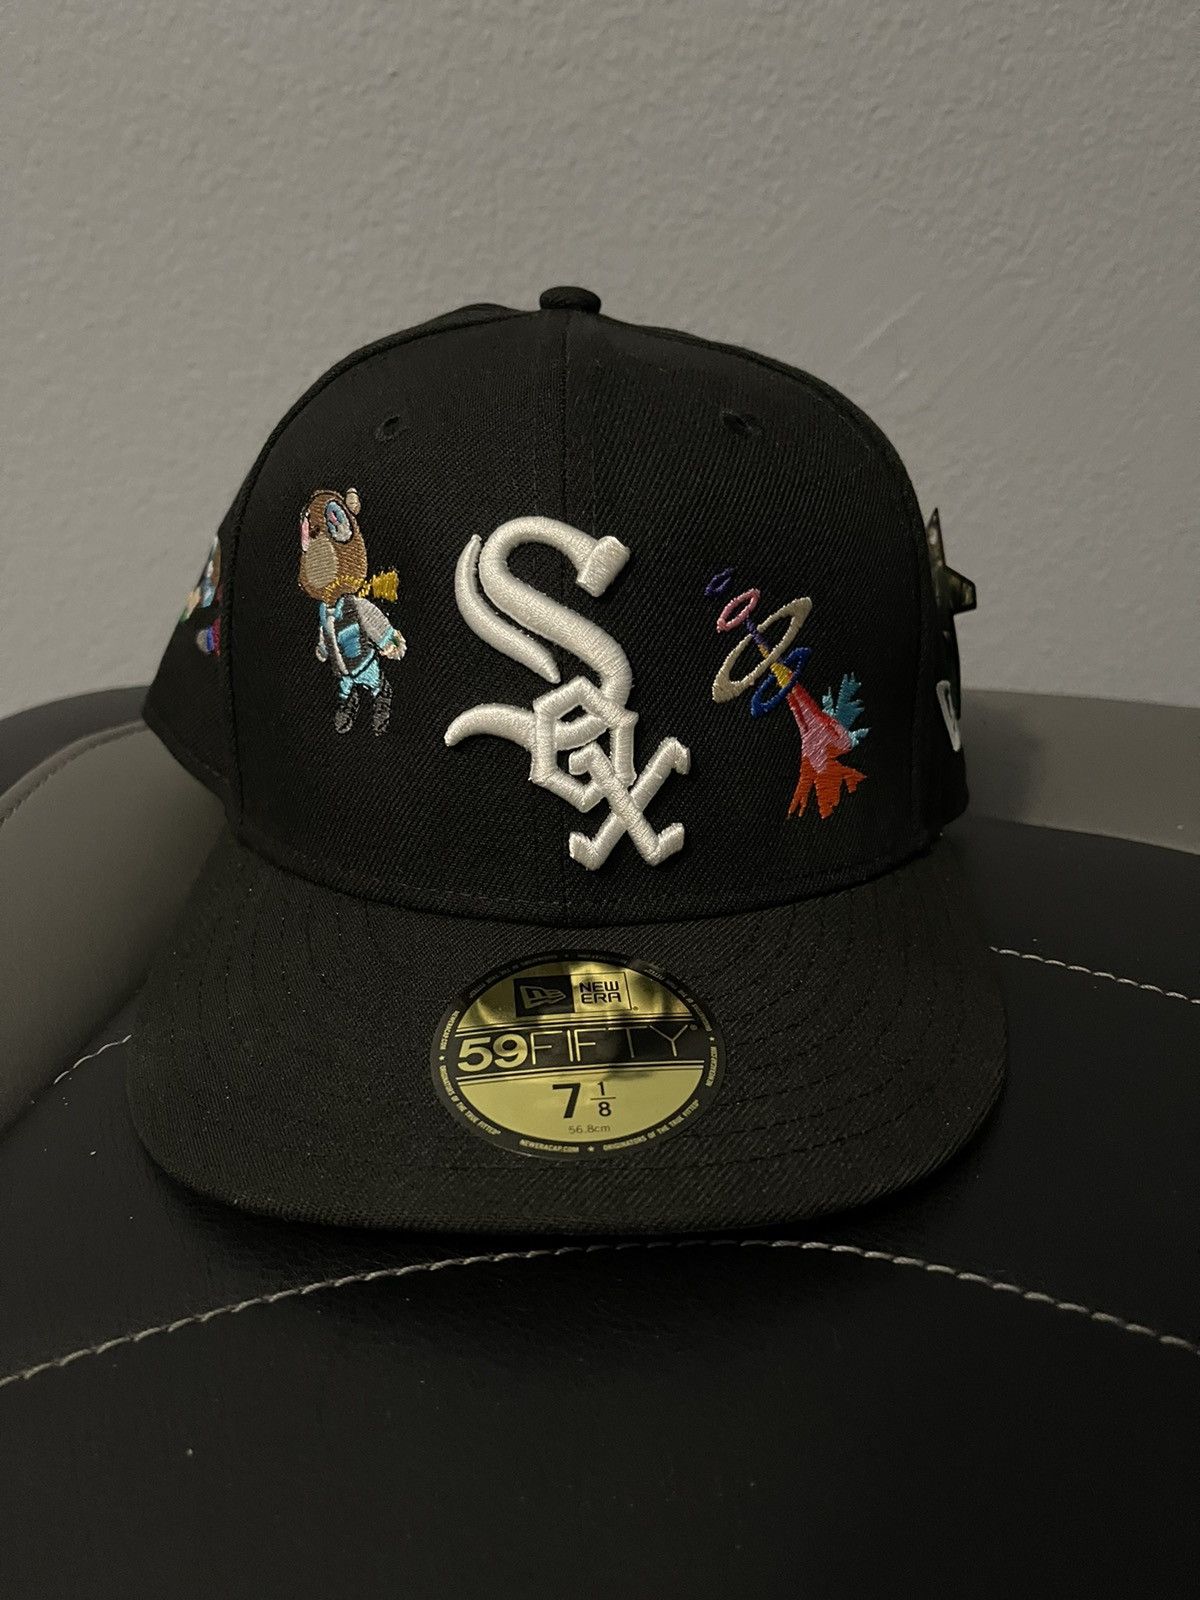 Demo World The Graduation Chicago Sox Fitted Hat Black - US